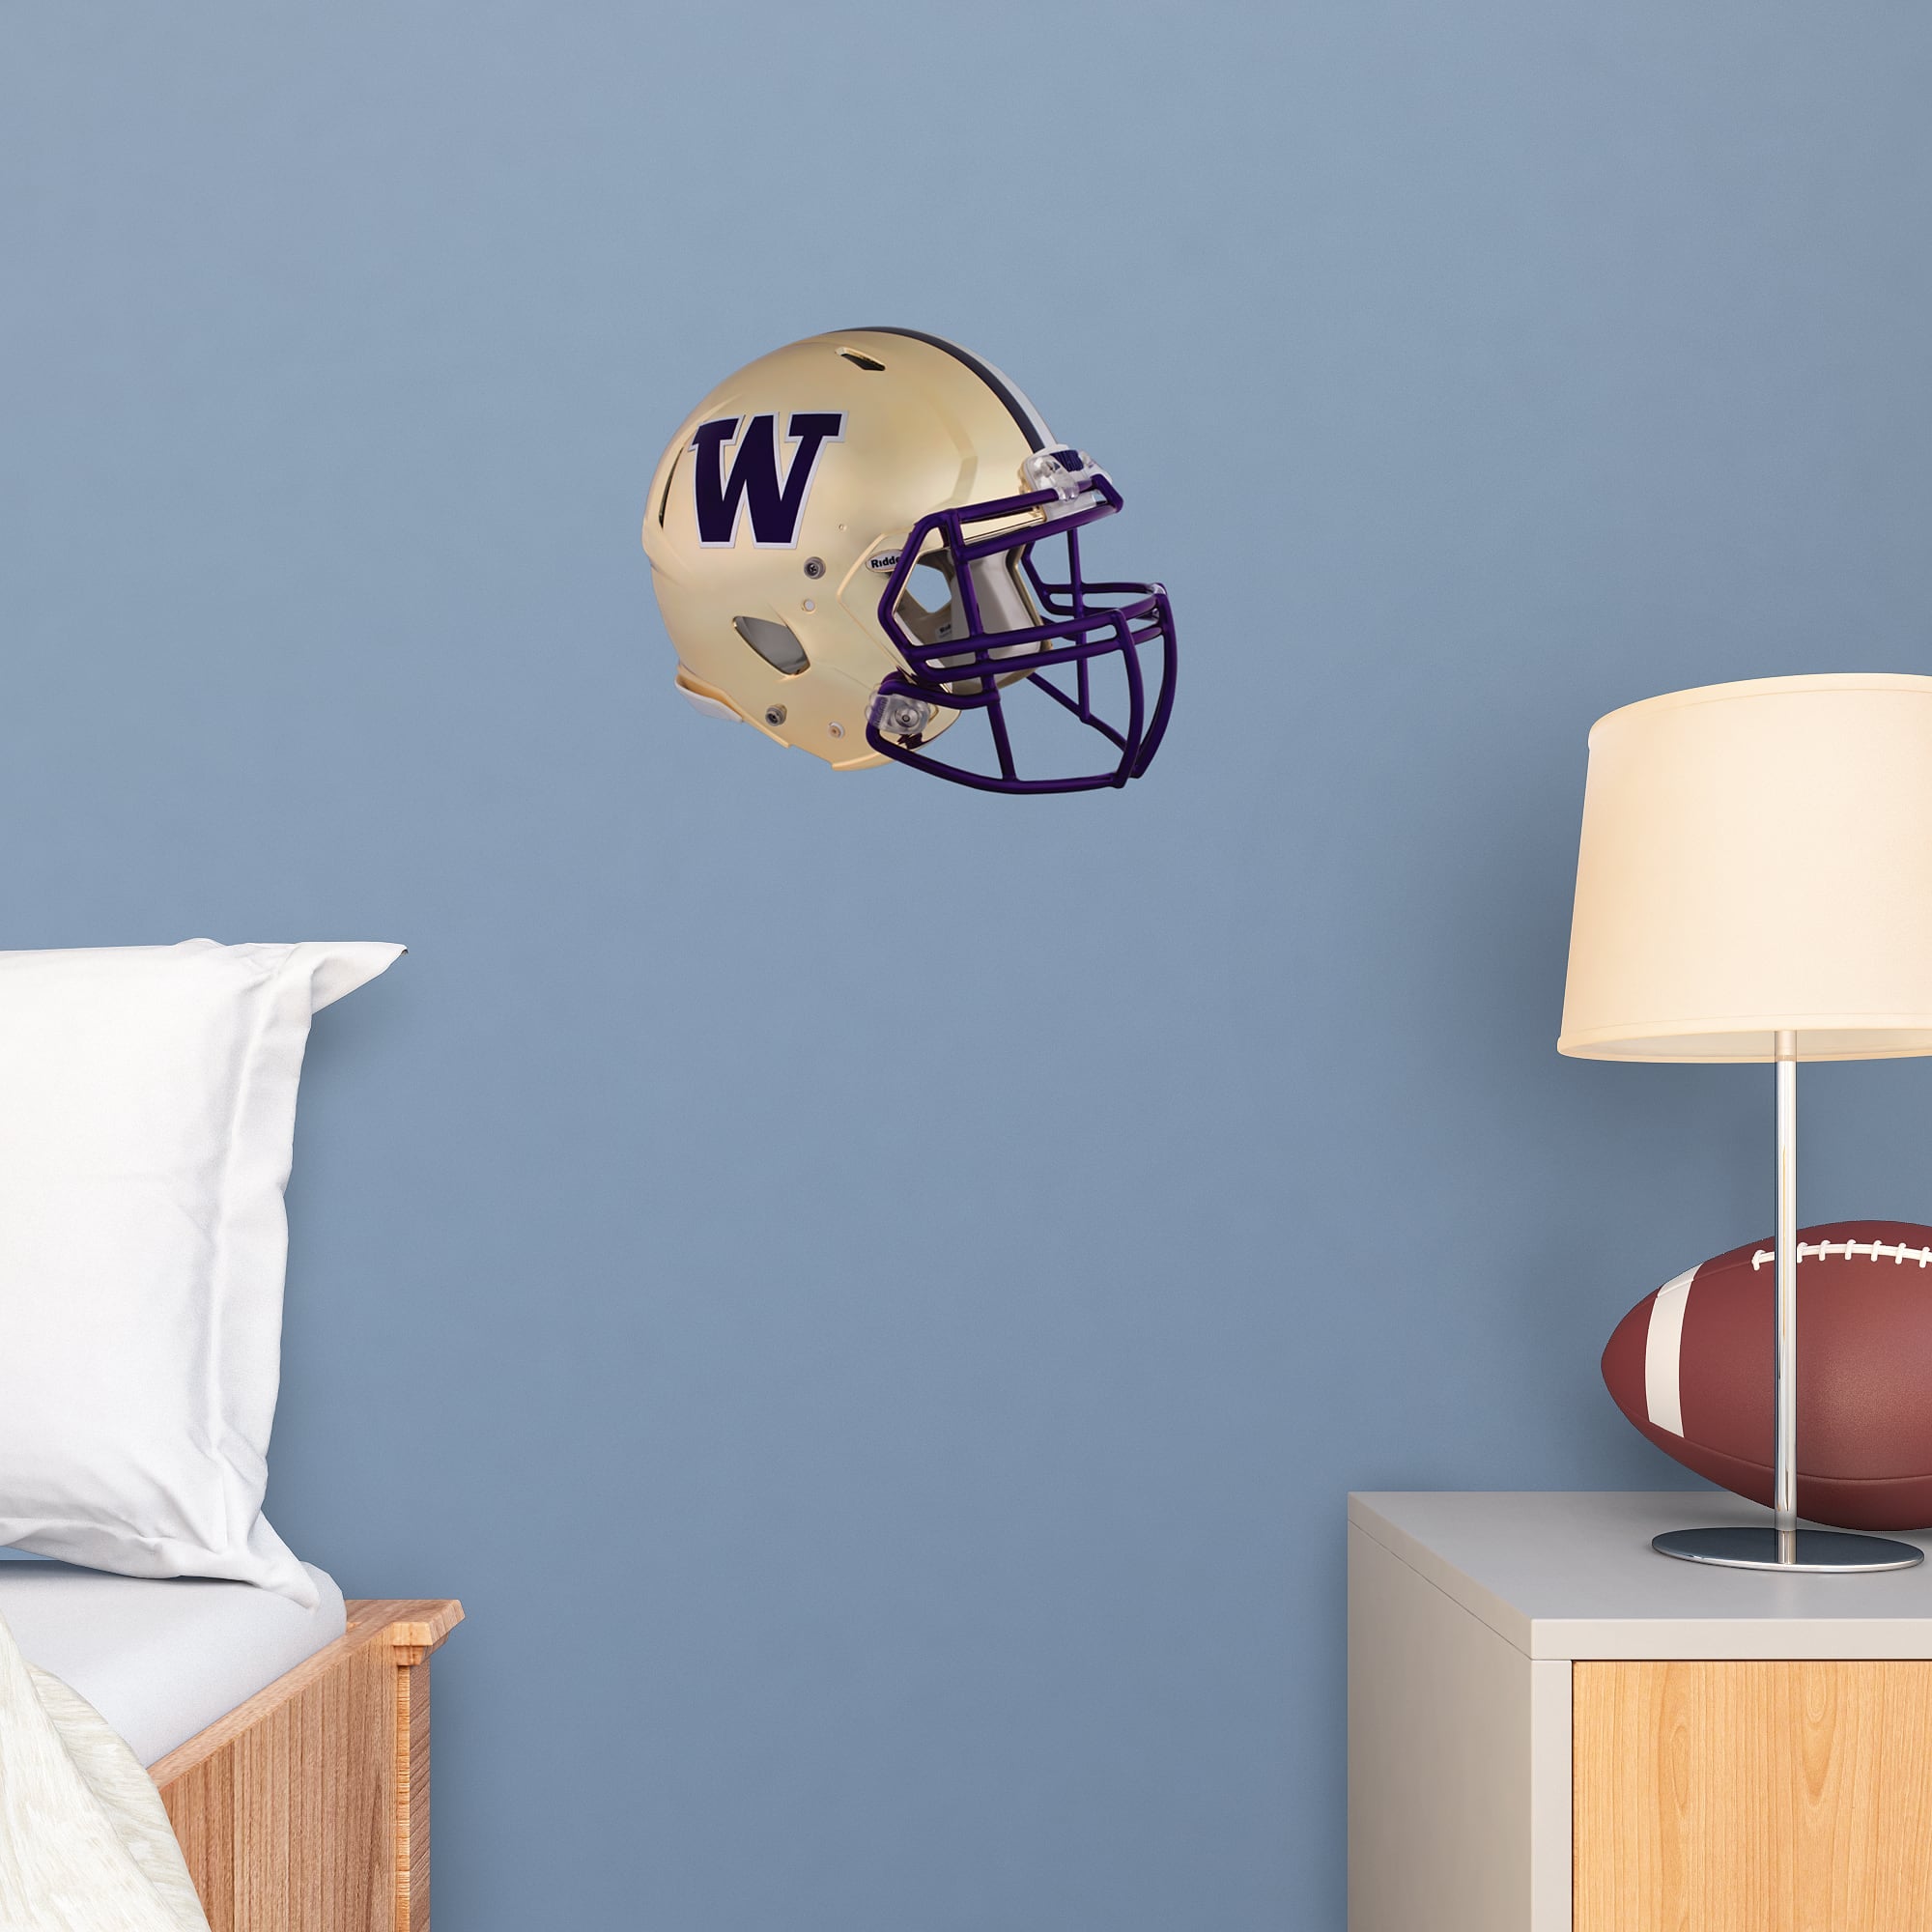 Washington Huskies: Helmet - Officially Licensed Removable Wall Decal 12.0"W x 10.0"H by Fathead | Vinyl